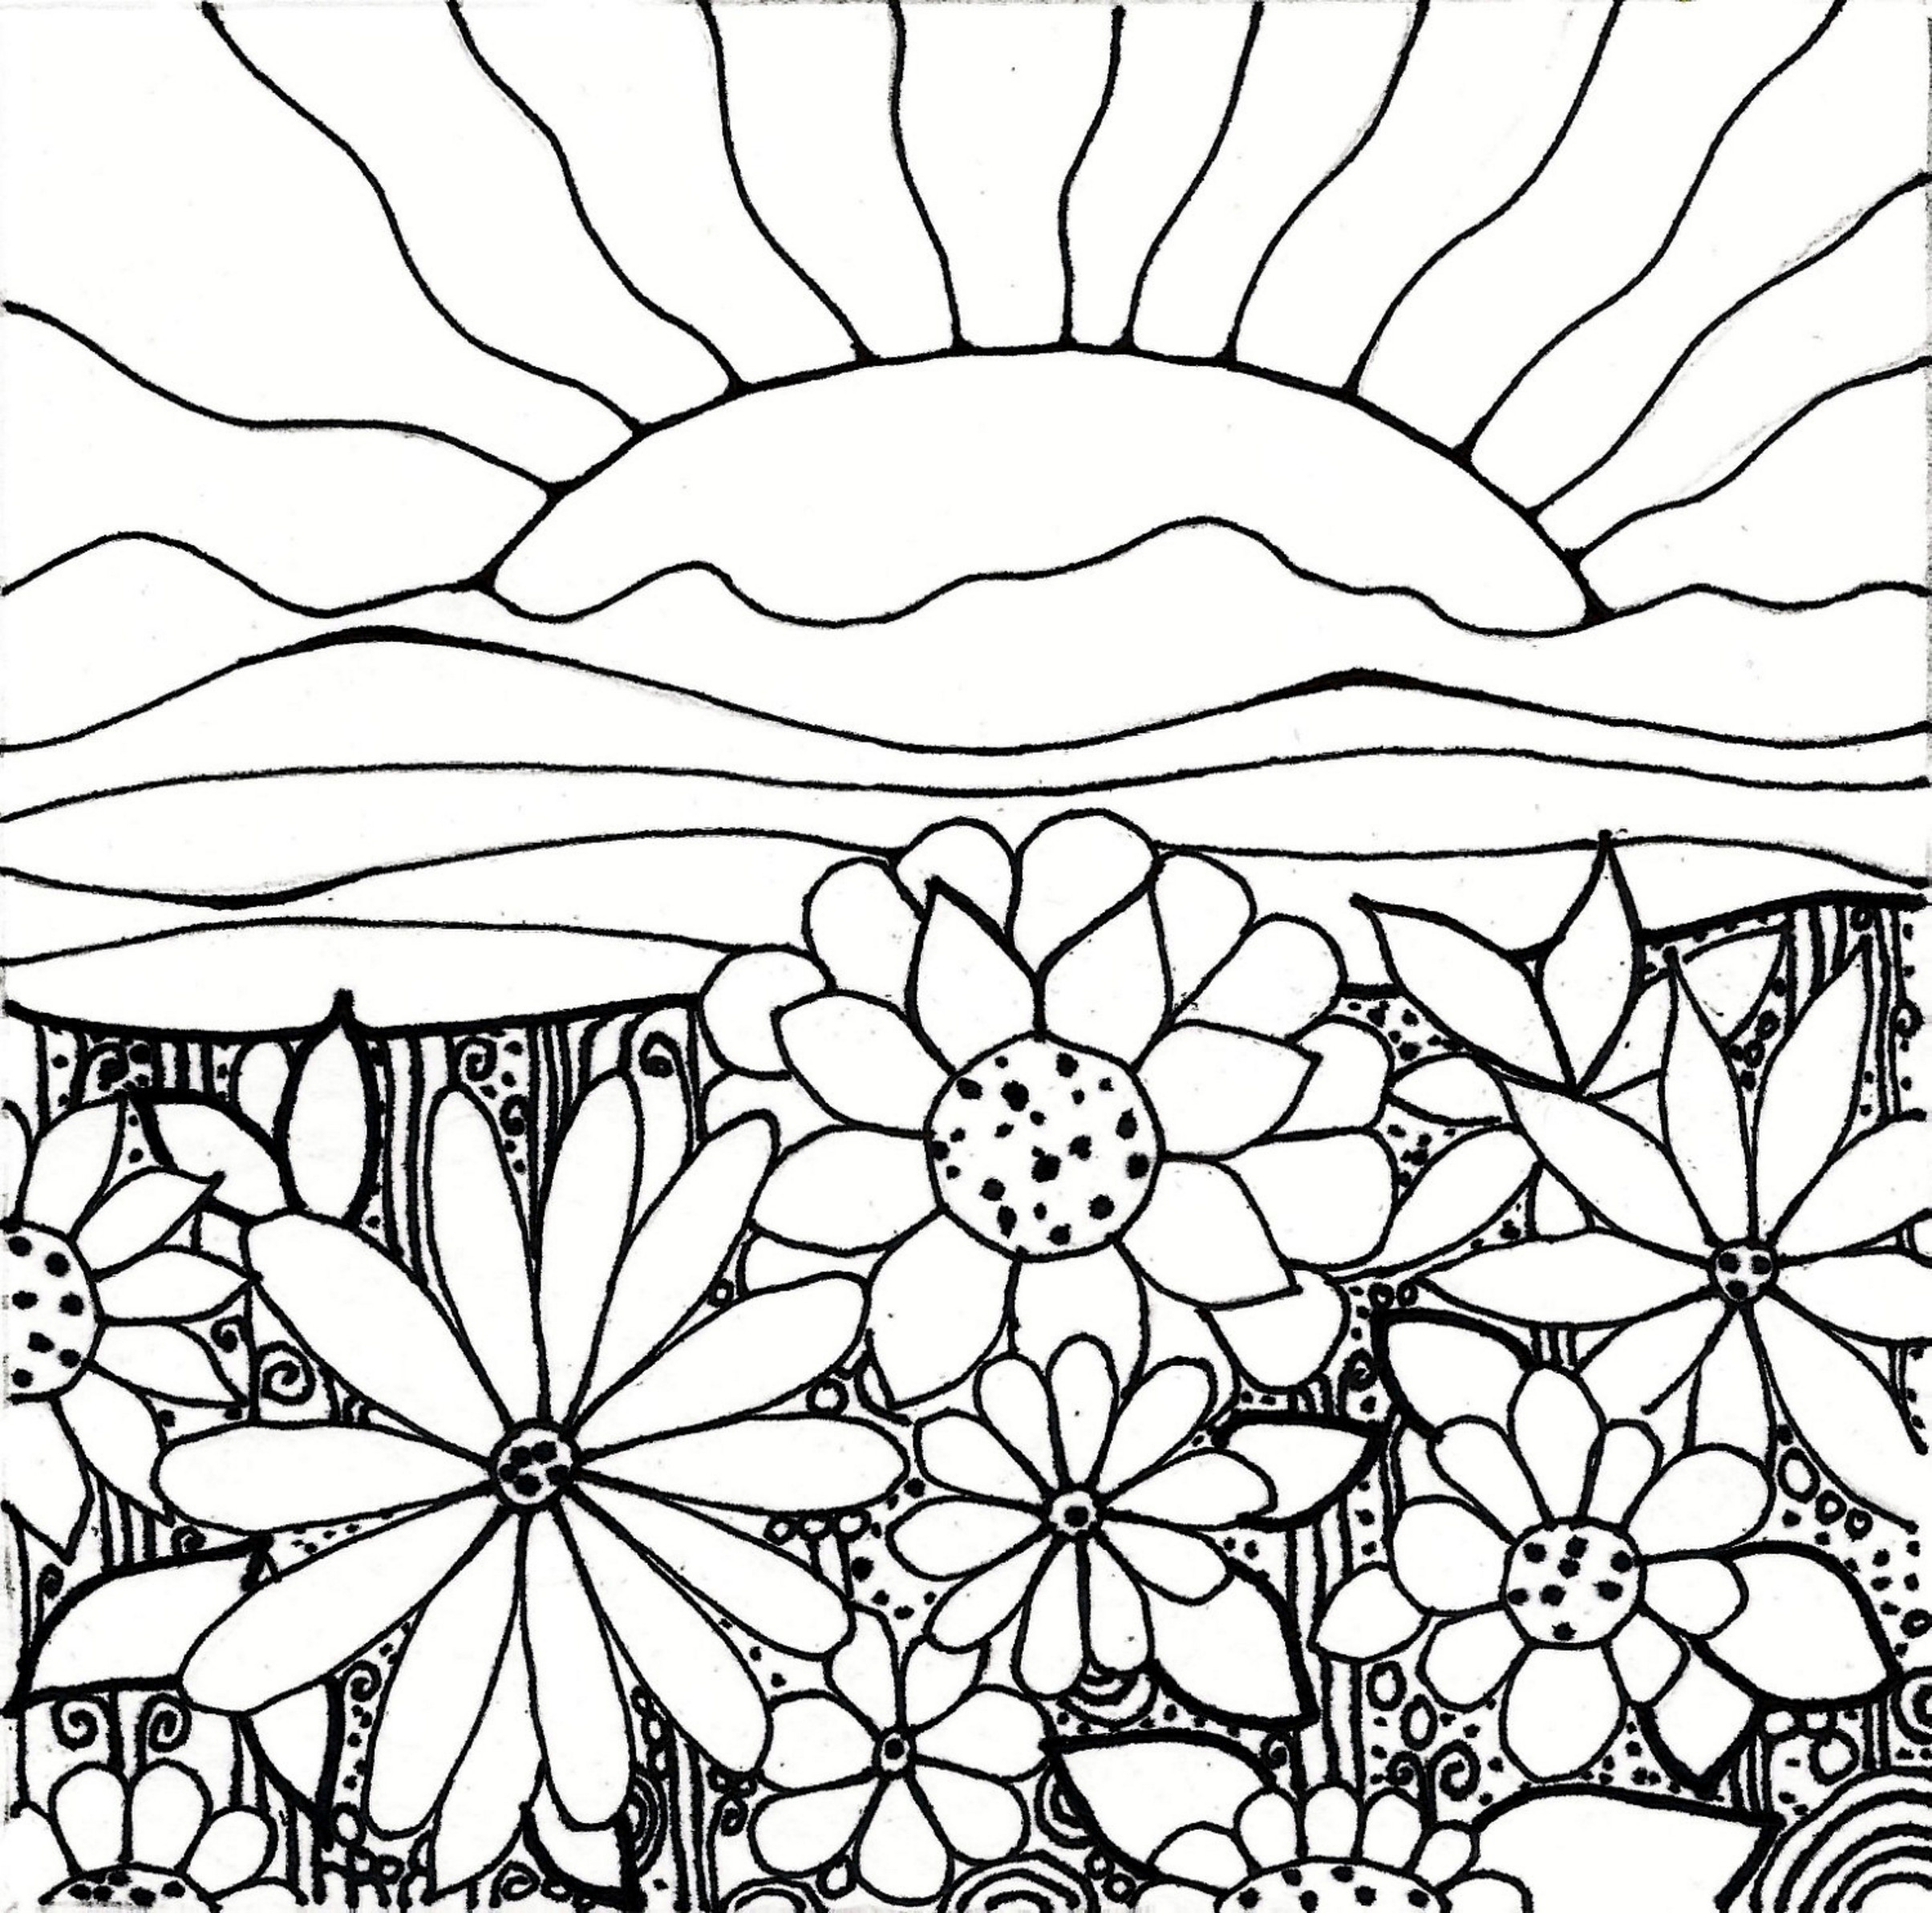 Beach Sunset Drawing Black And White